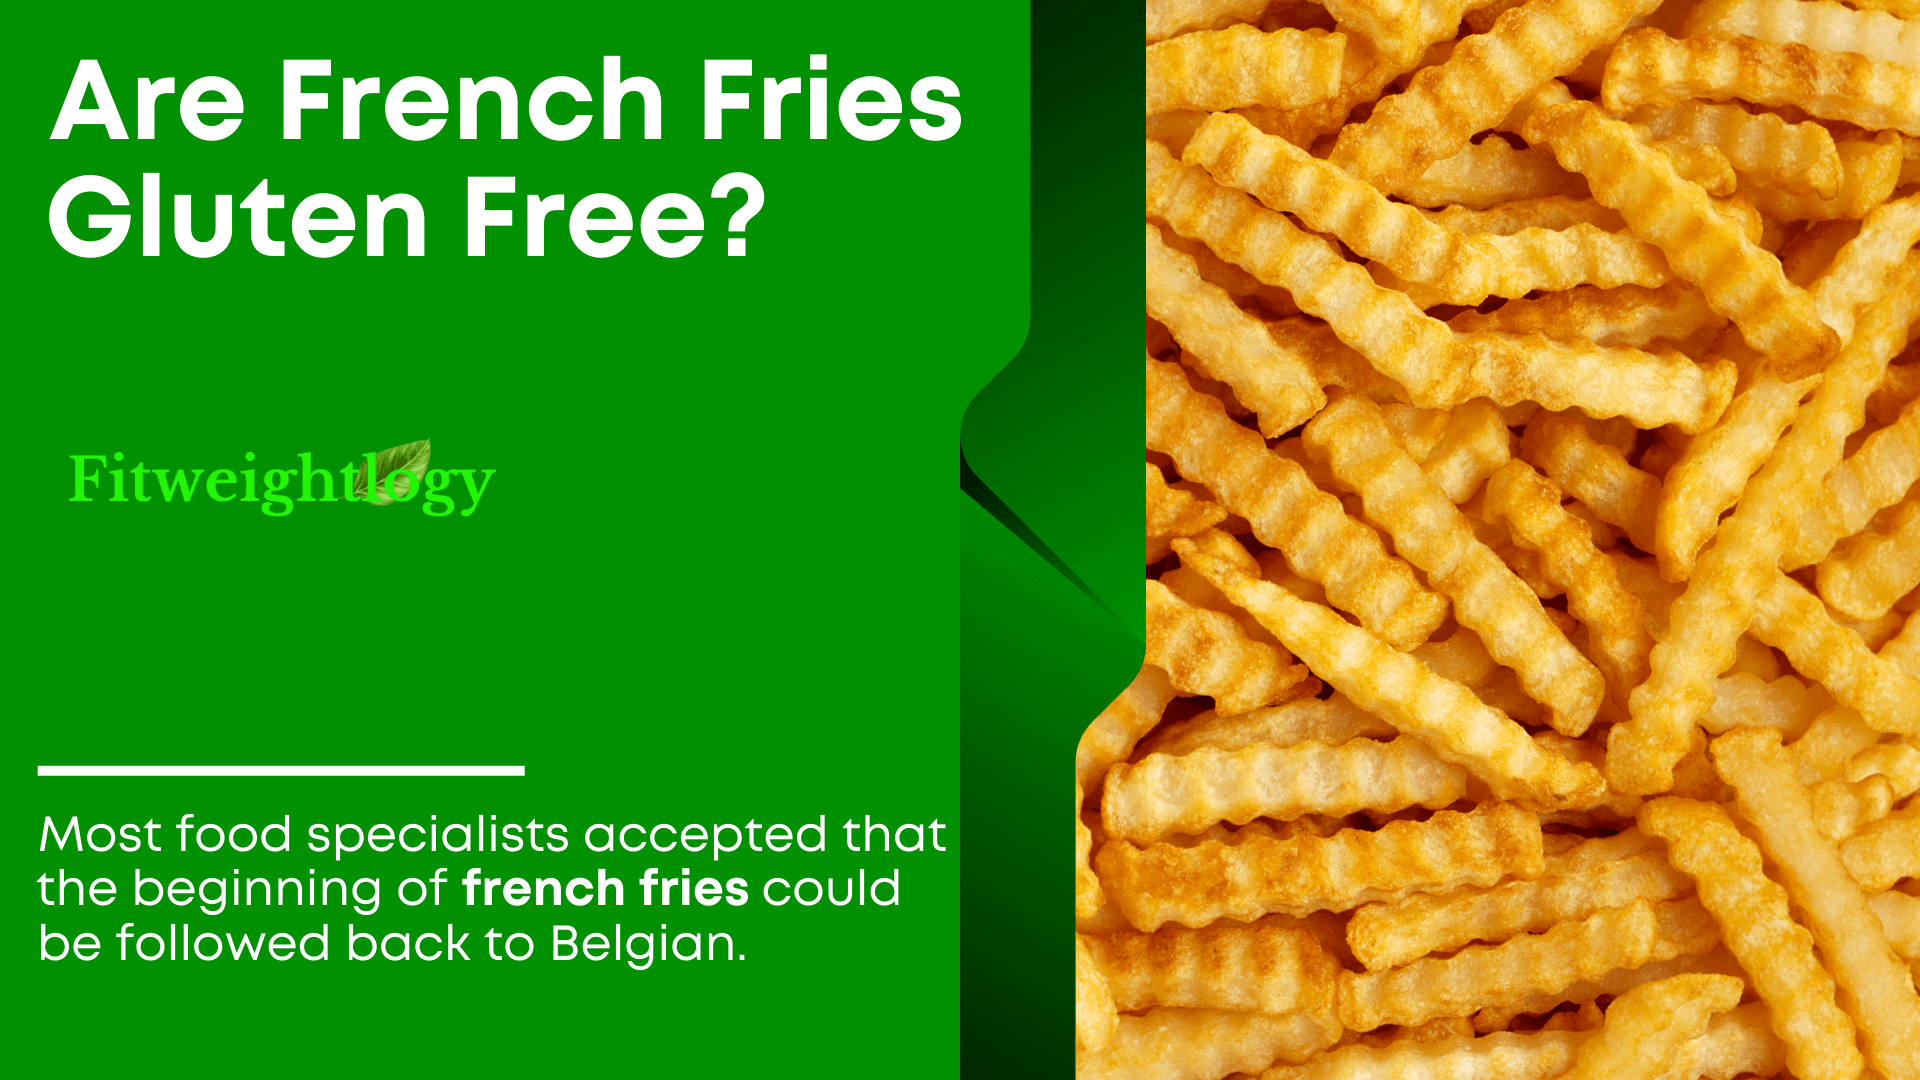 Are French Fries Gluten-Free